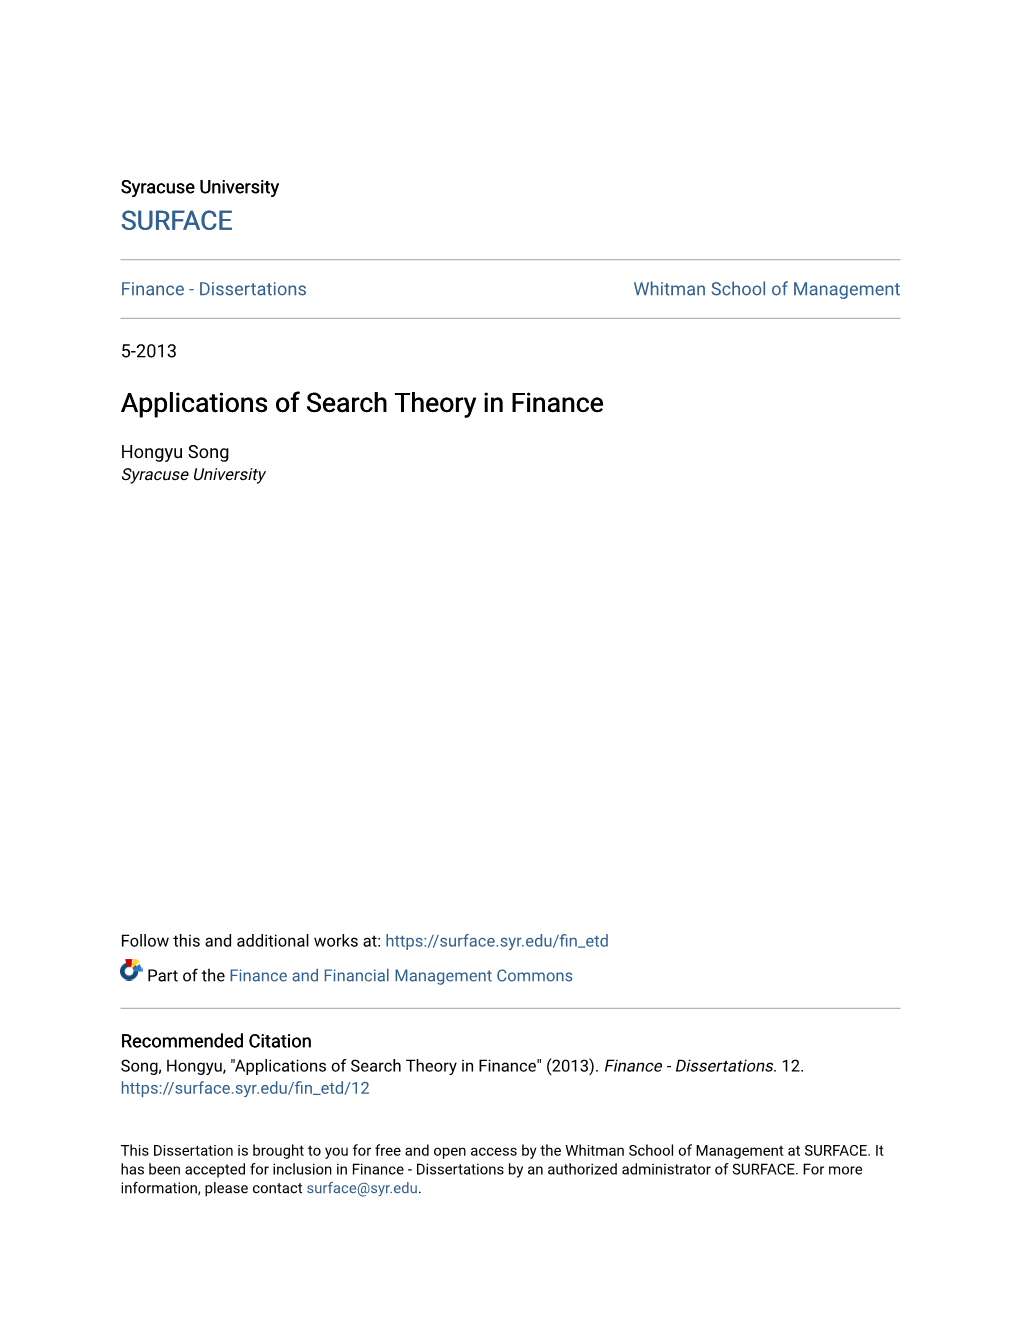 Applications of Search Theory in Finance